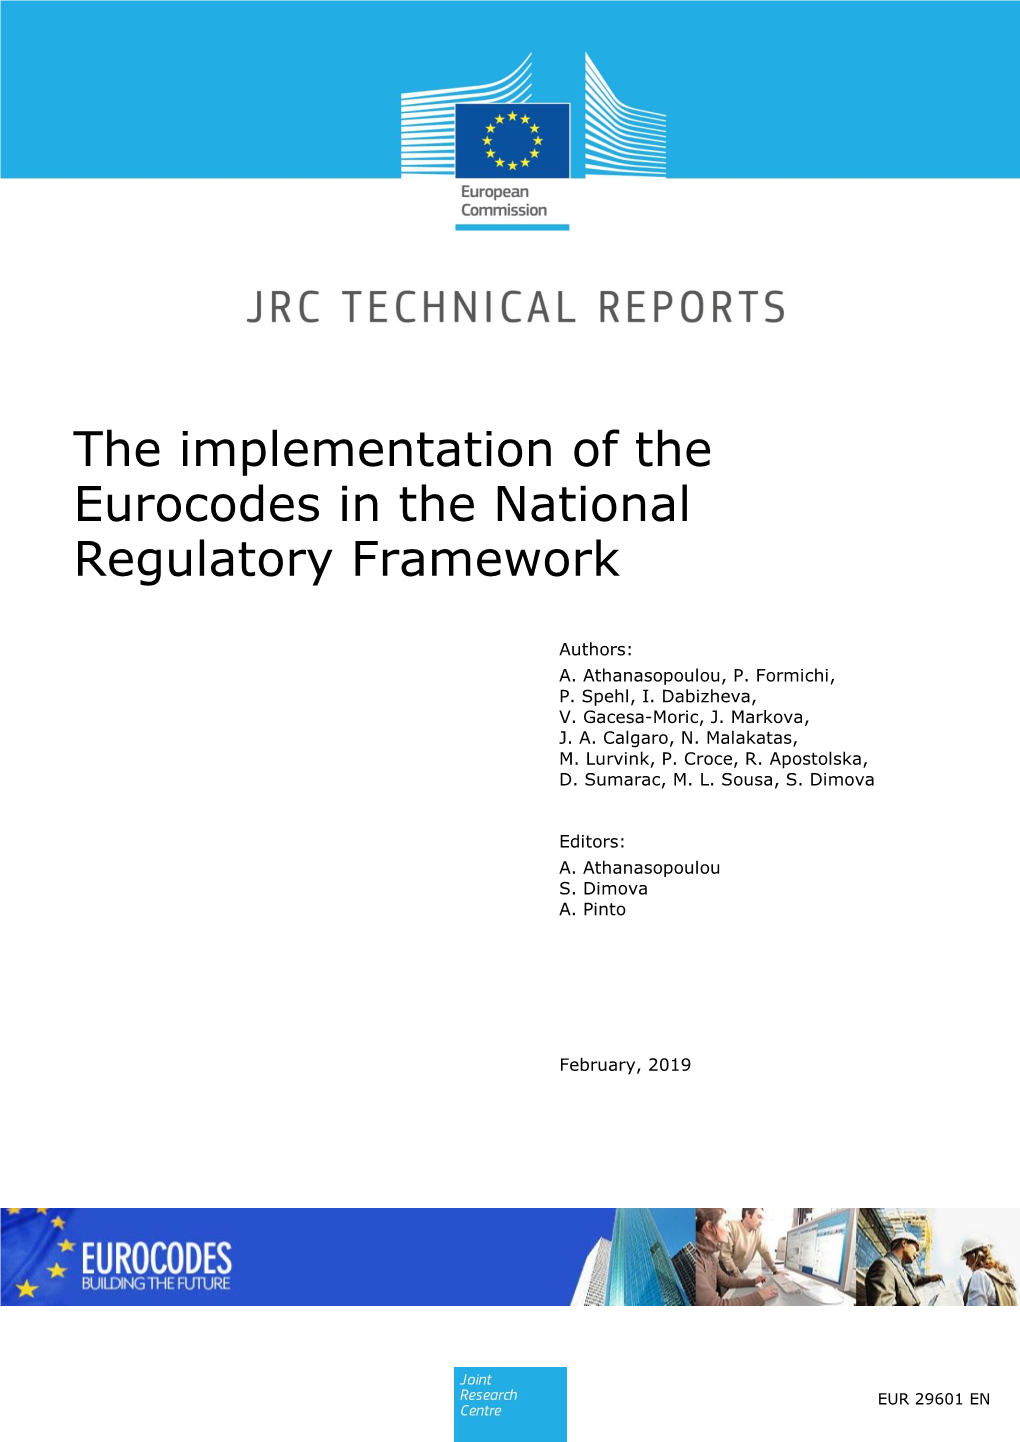 The Implementation of the Eurocodes in the National Regulatory Framework